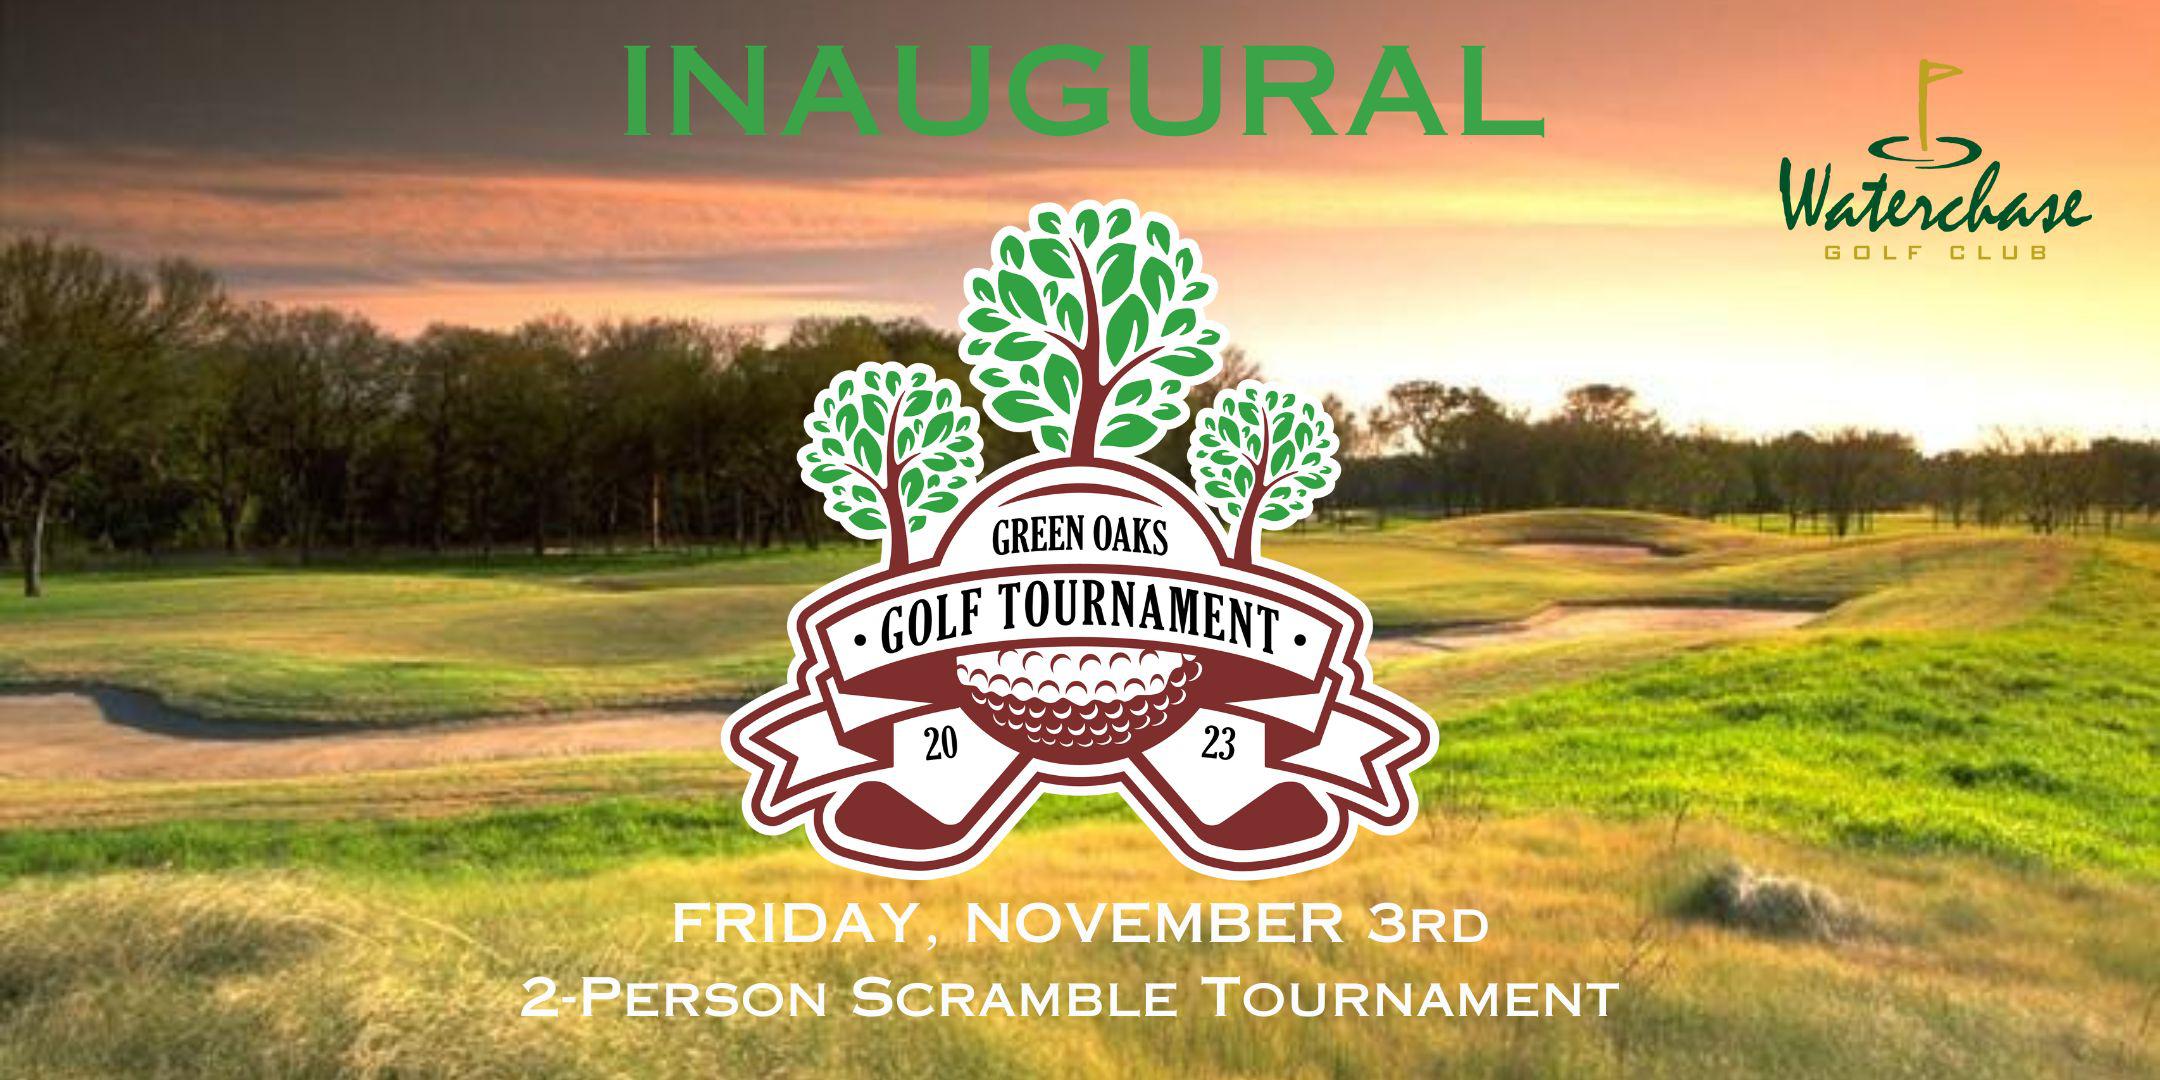 Green Oaks 1st Annual Golf Tournament at Waterchase Golf Club